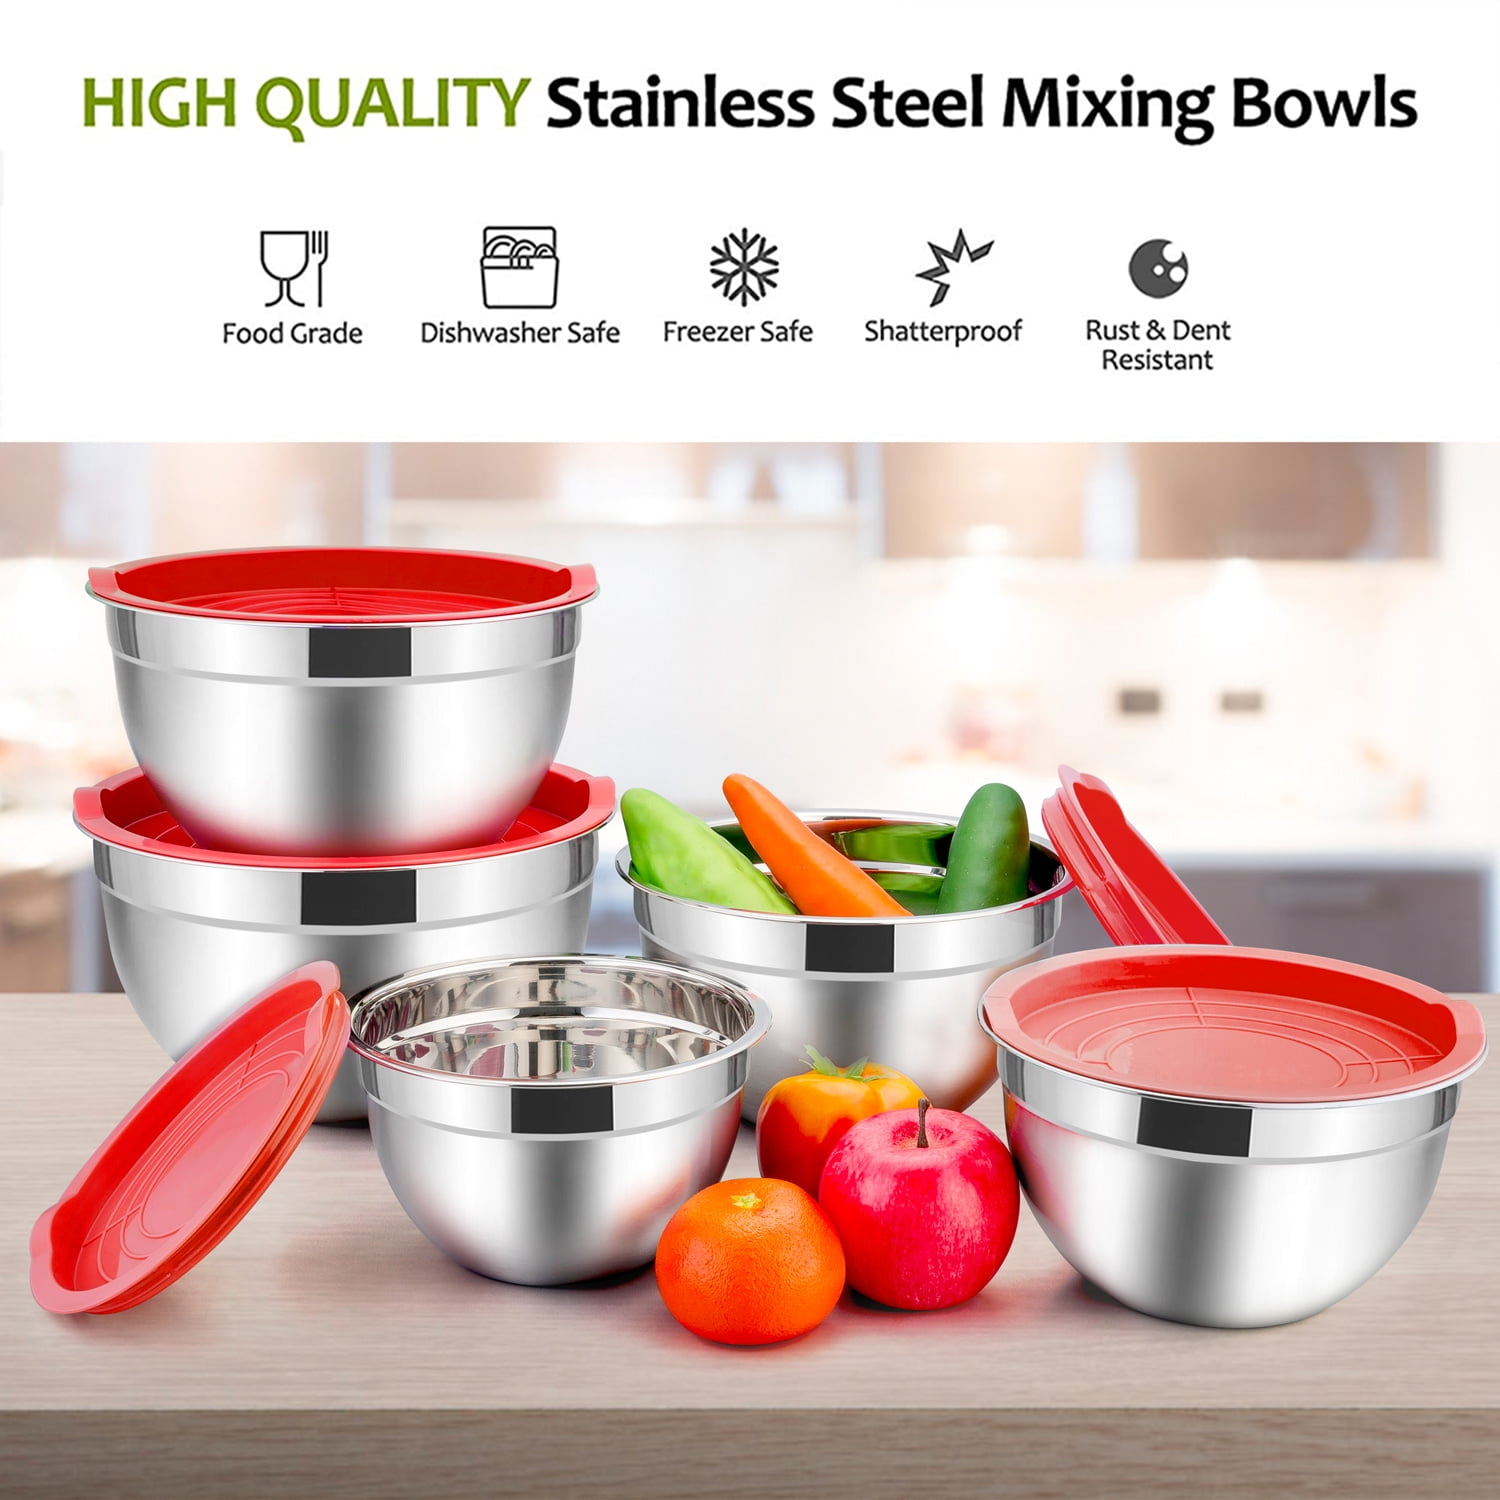 Raking 5 Piece Mixing Bowls Large 5 Quart Capacity Stainless Steel Bowl Set with Colorful Lids for Kitchen, Camping and Food Storage